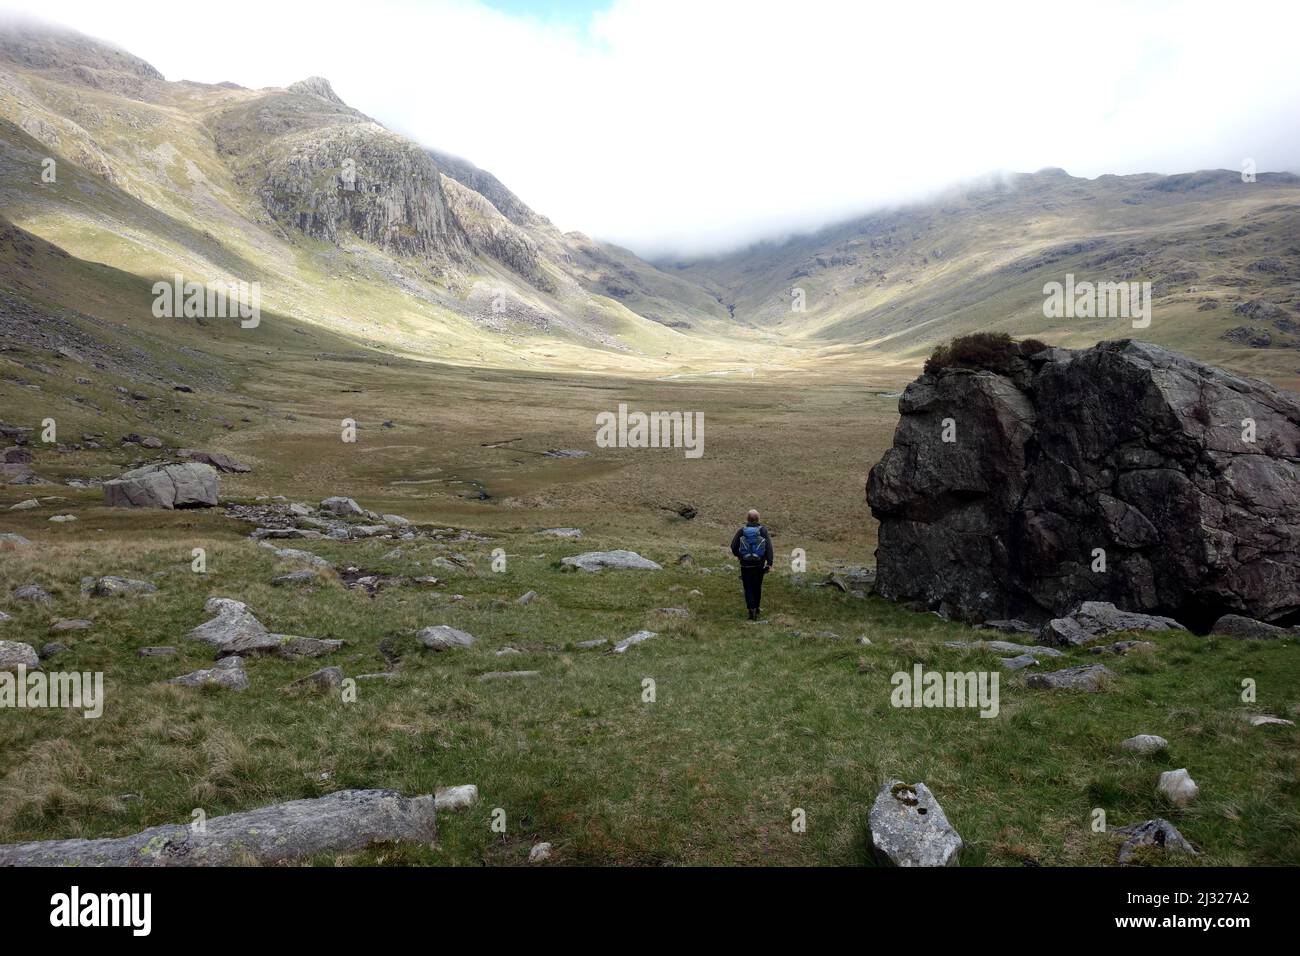 Man Walking by Huge Boulder near River Esk to the Scafell Mountain Range in the Eskdale Valley, Lake District National Park, Cumbria, England, UK. Stock Photo